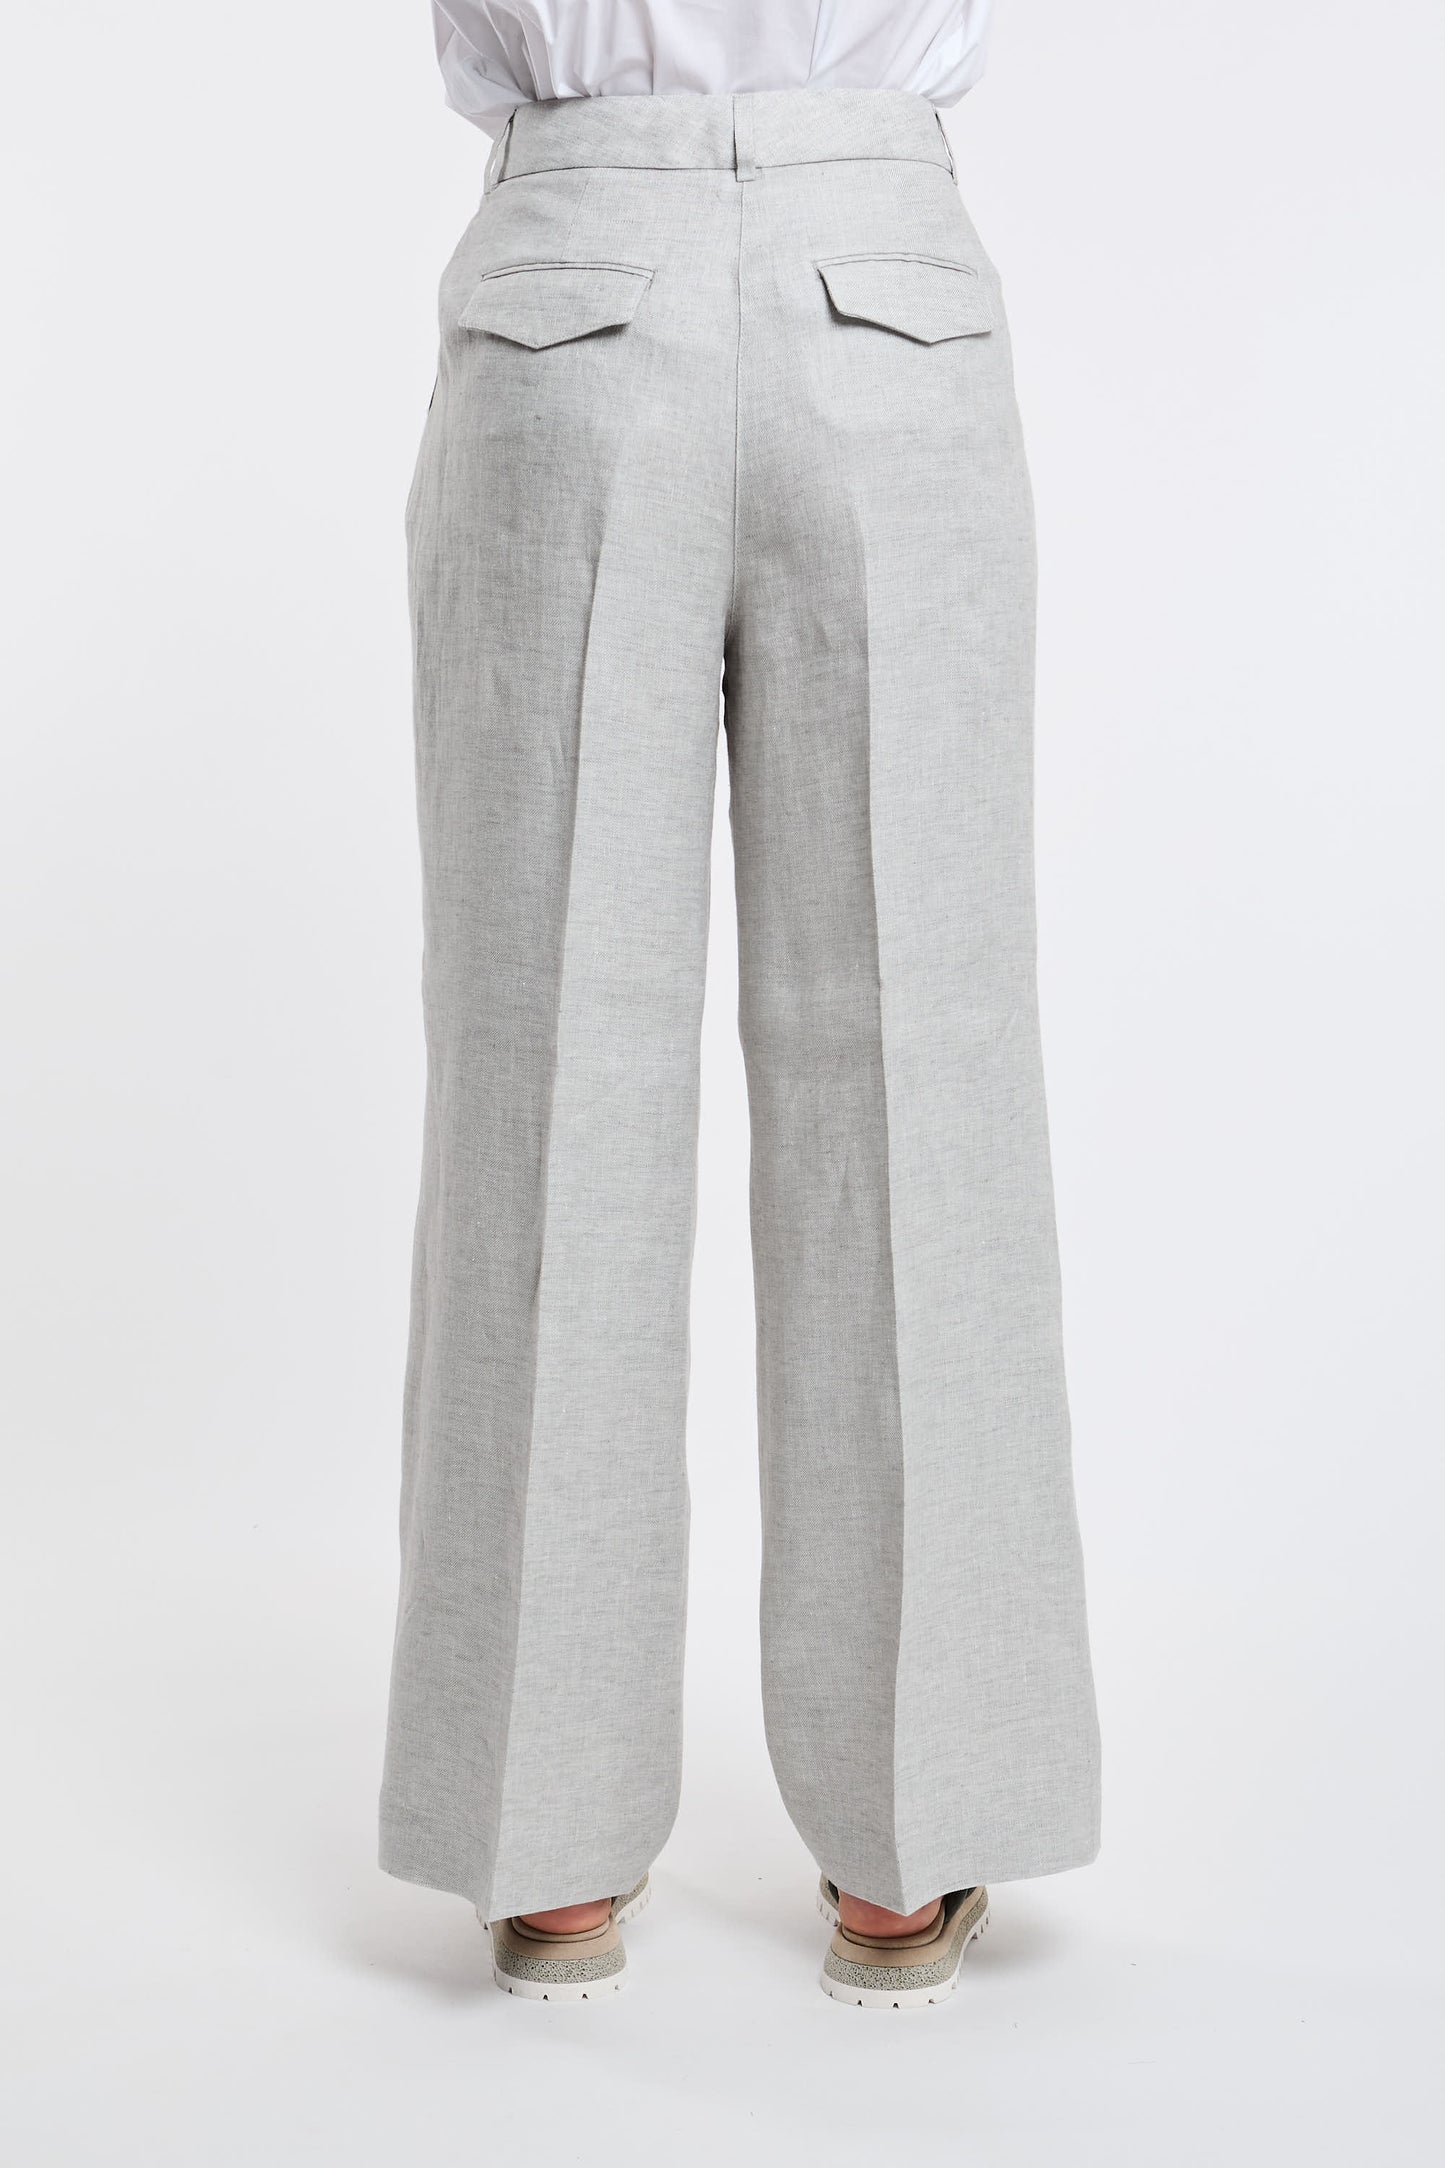  Peserico Gray Trousers For Women Grigio Donna - 4